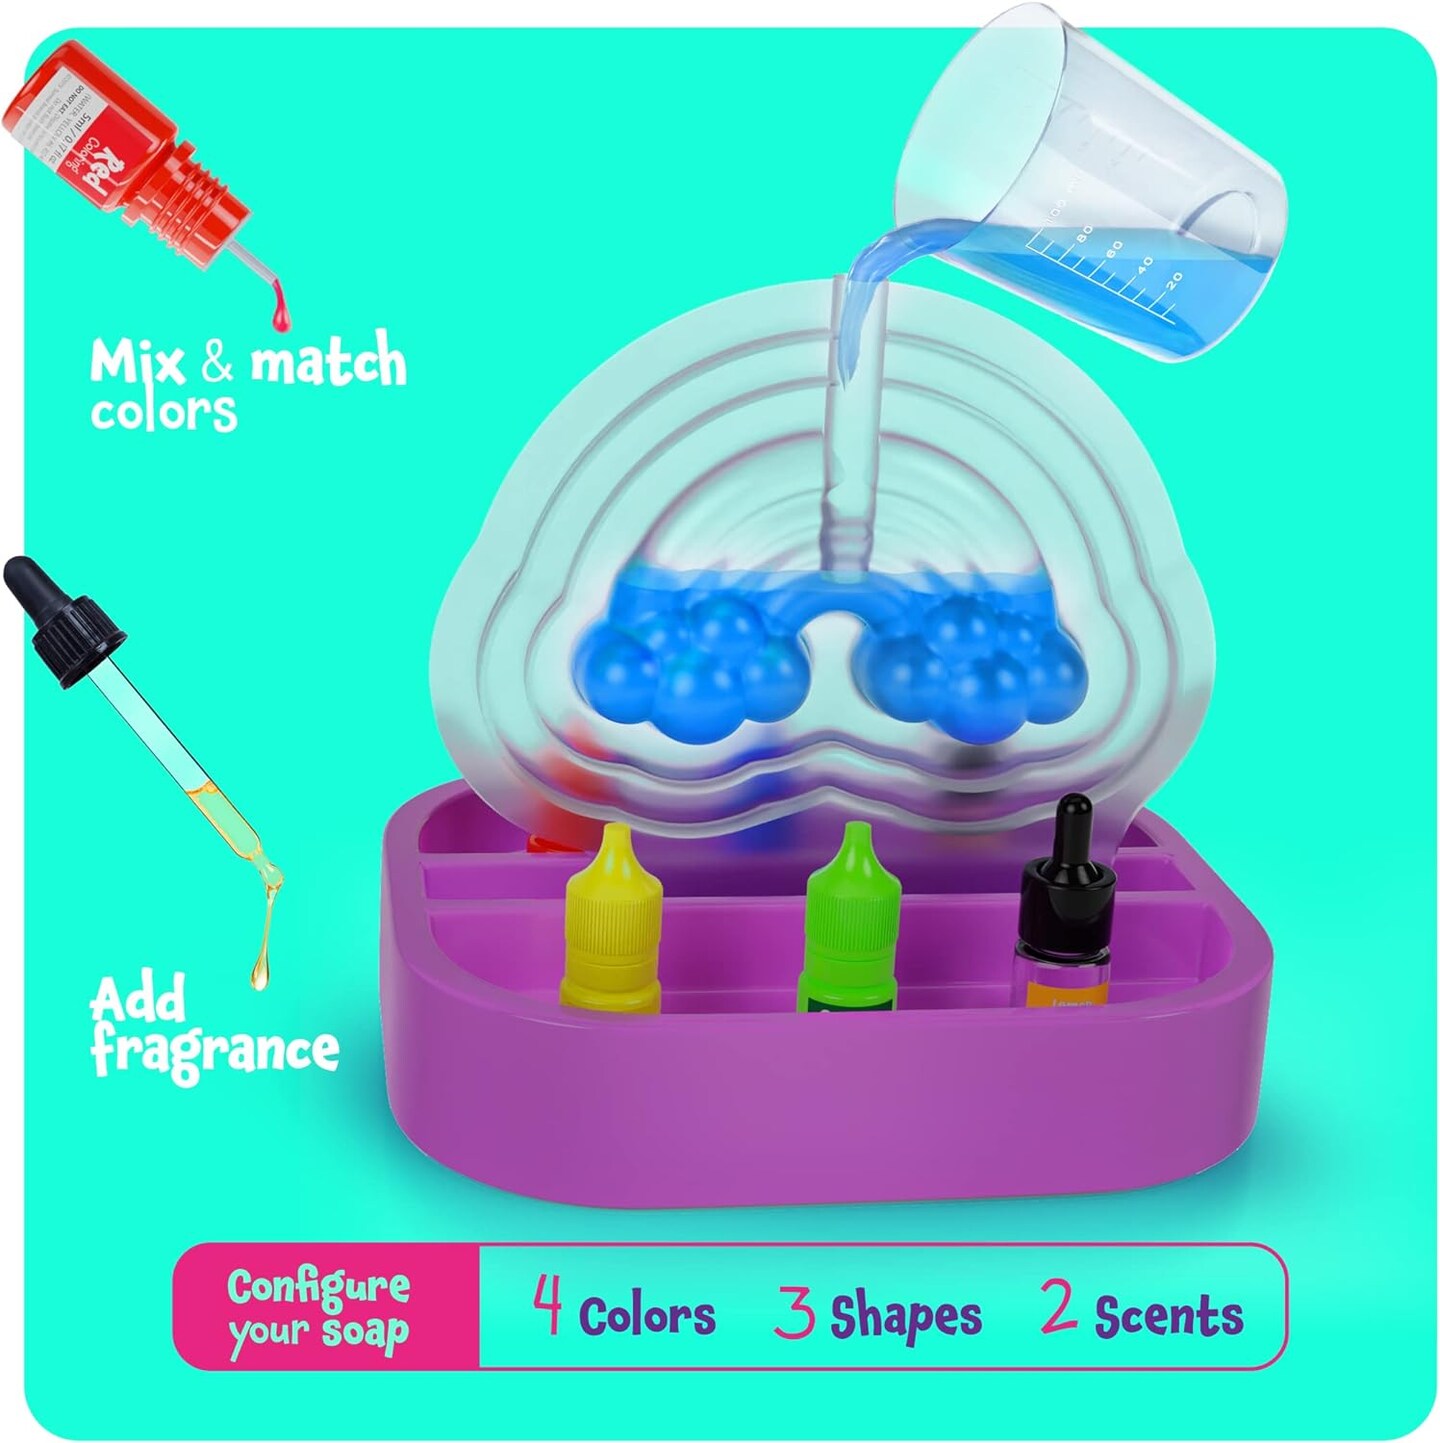  Dan&Darci Soap Making Kit for Kids - Crafts Science Toys -  Birthday Gifts for Girls and Boys Age 6-12 Years Old Girl DIY - Best  Educational Activity Gift : Toys & Games